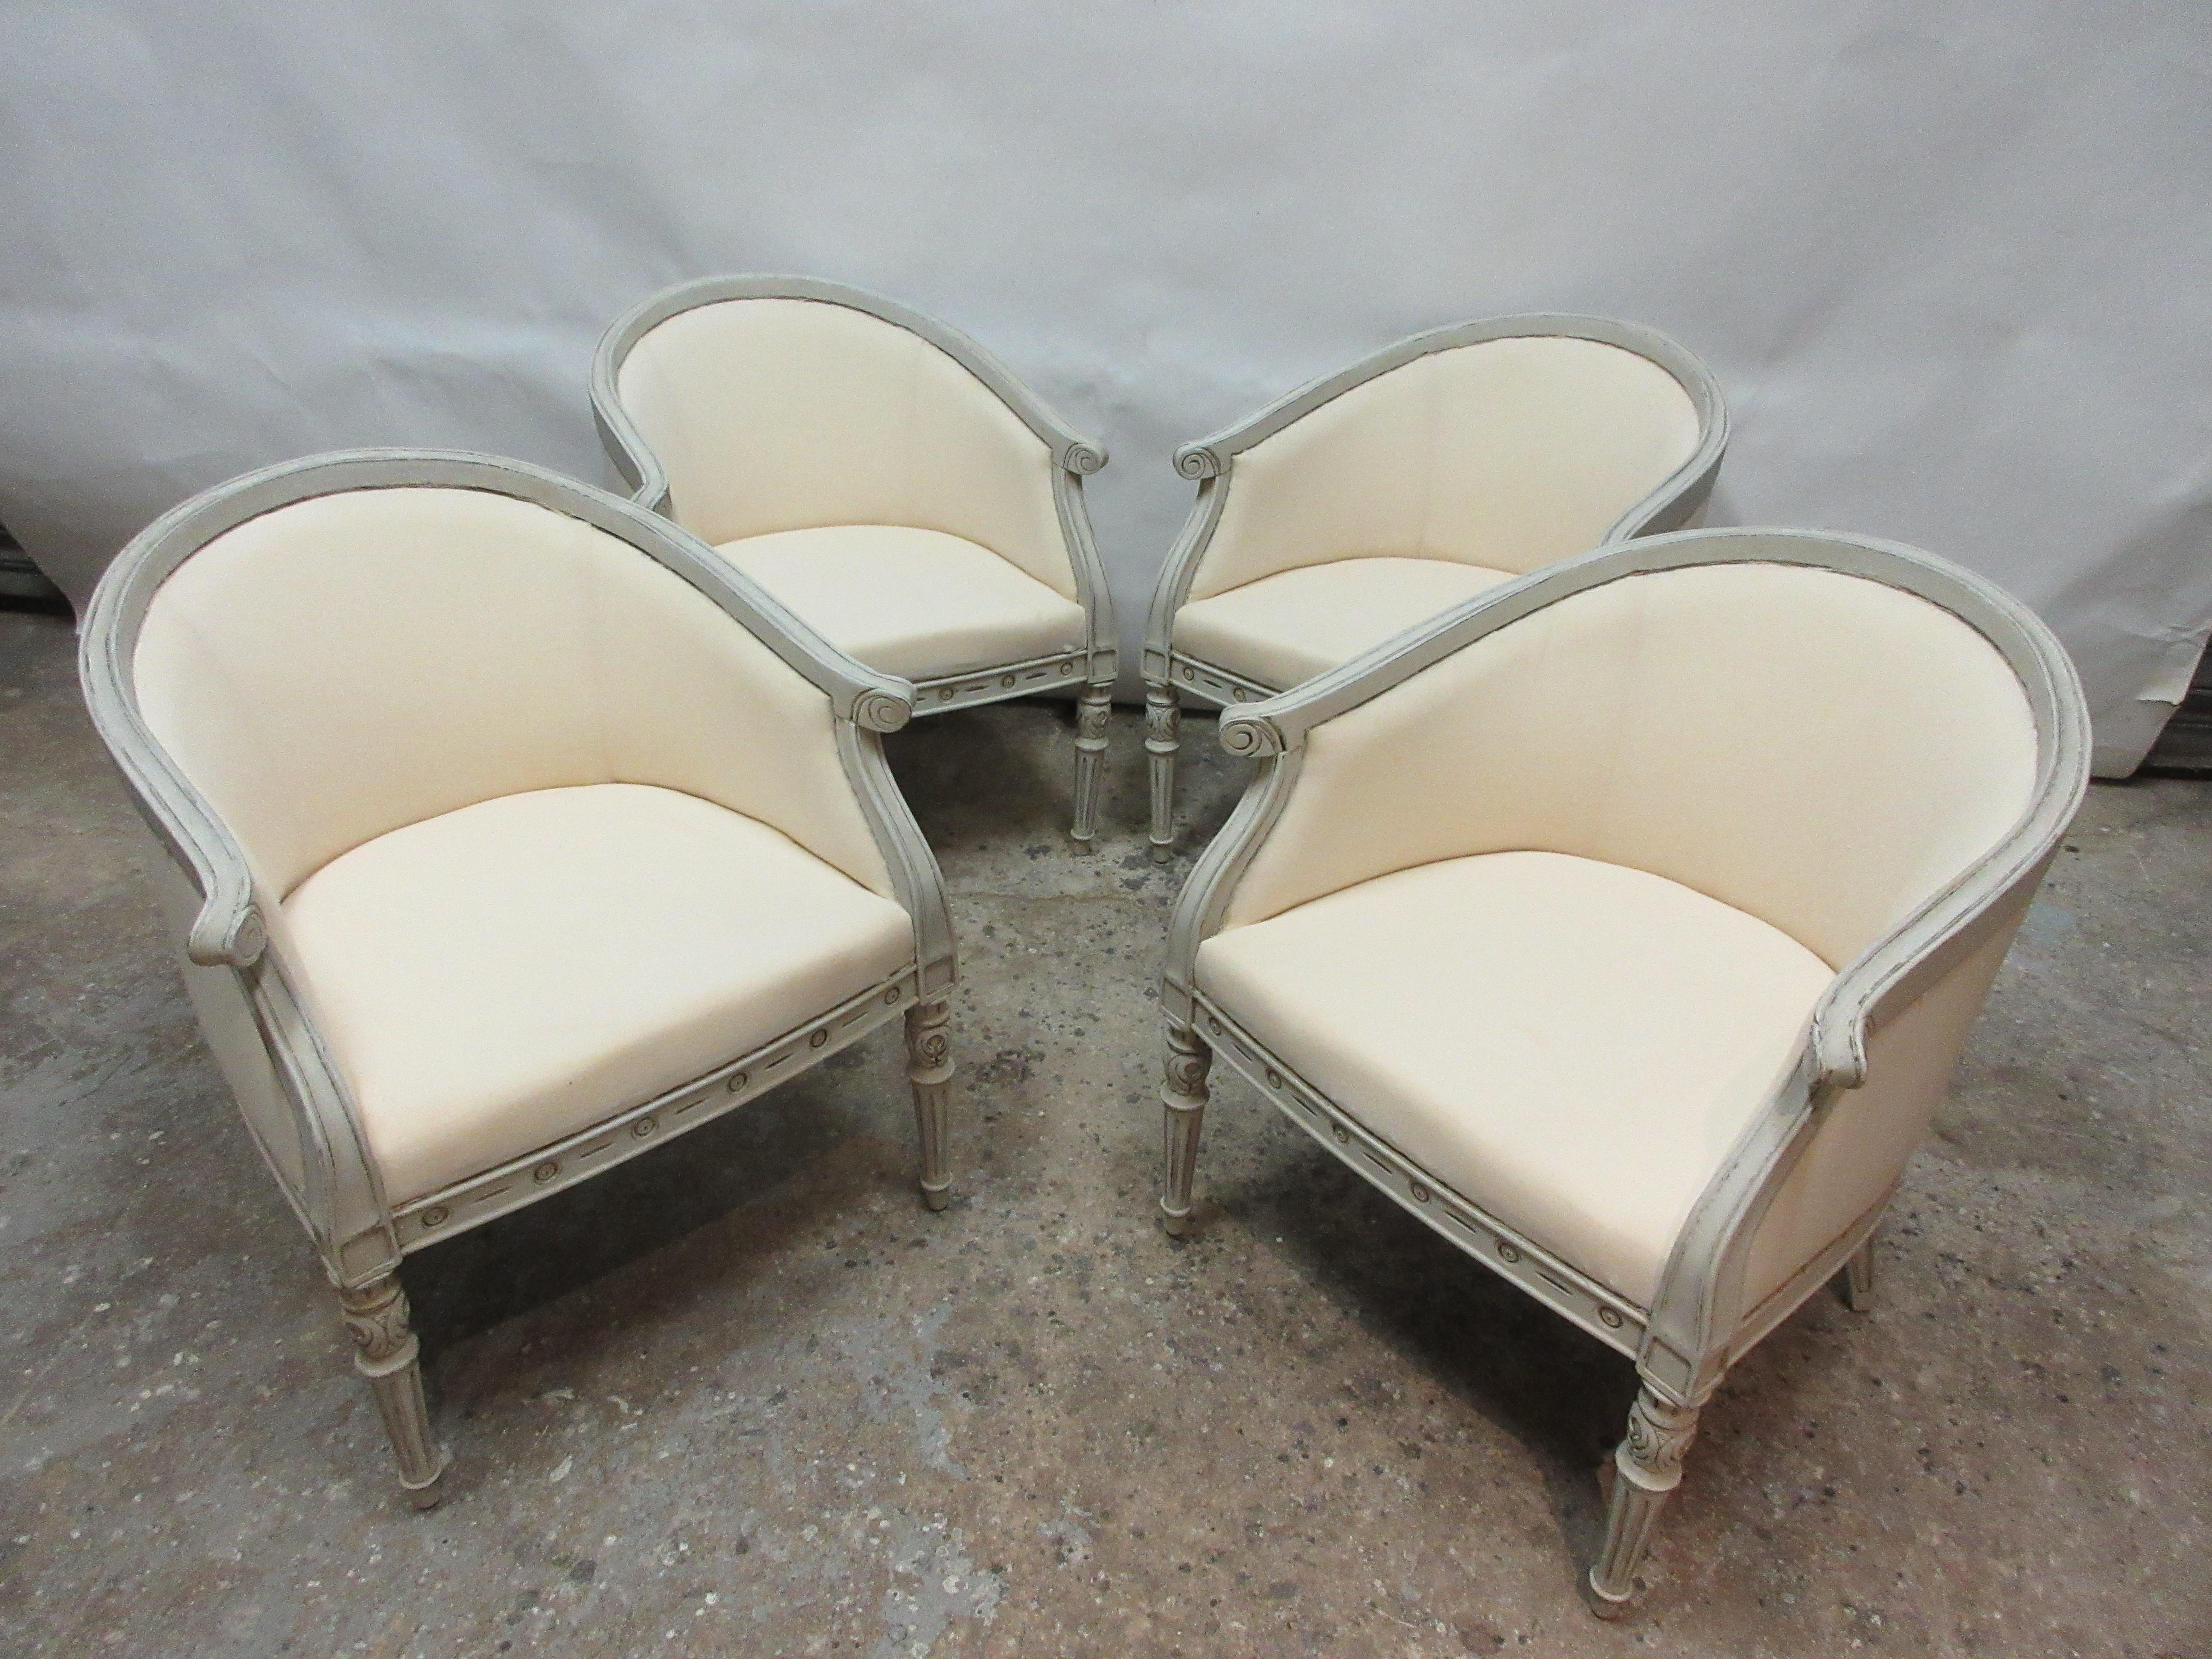 This is a set of 4 Swedish Gustavian Barrel chairs. They have been restored and repainted with milk paints 